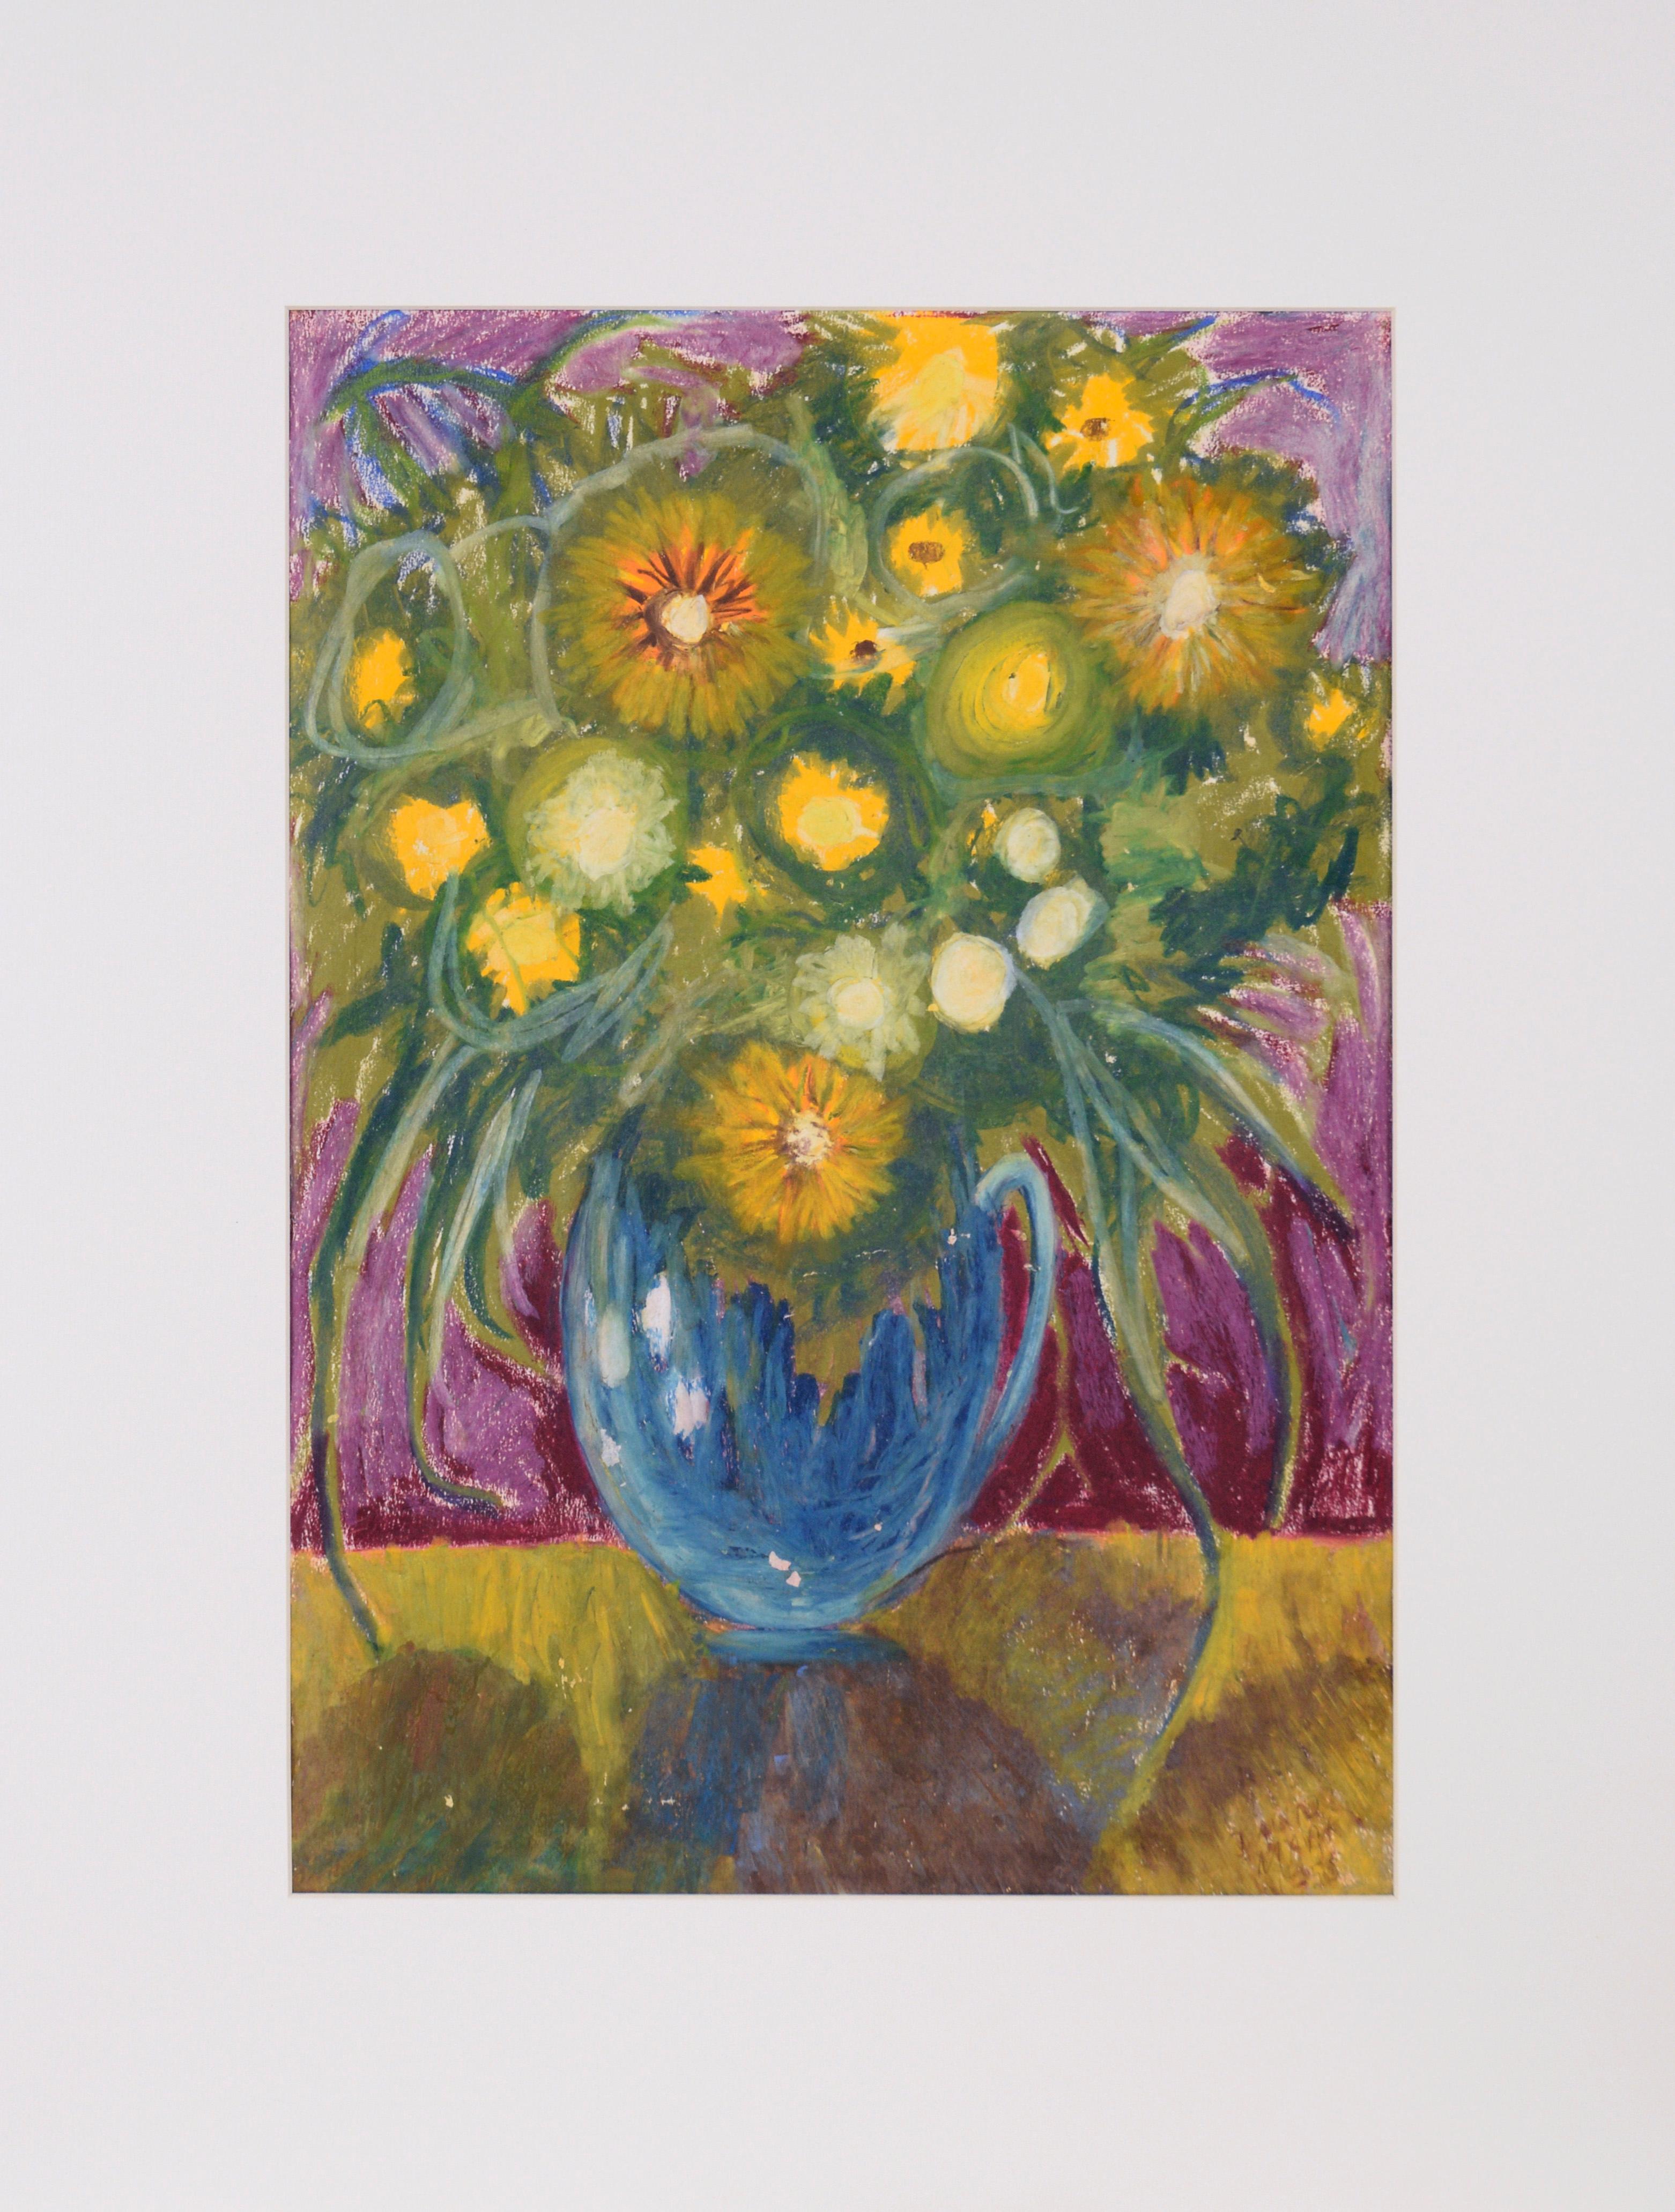 Daisies and Sunflowers - Still Life Oil Pastel on Paper